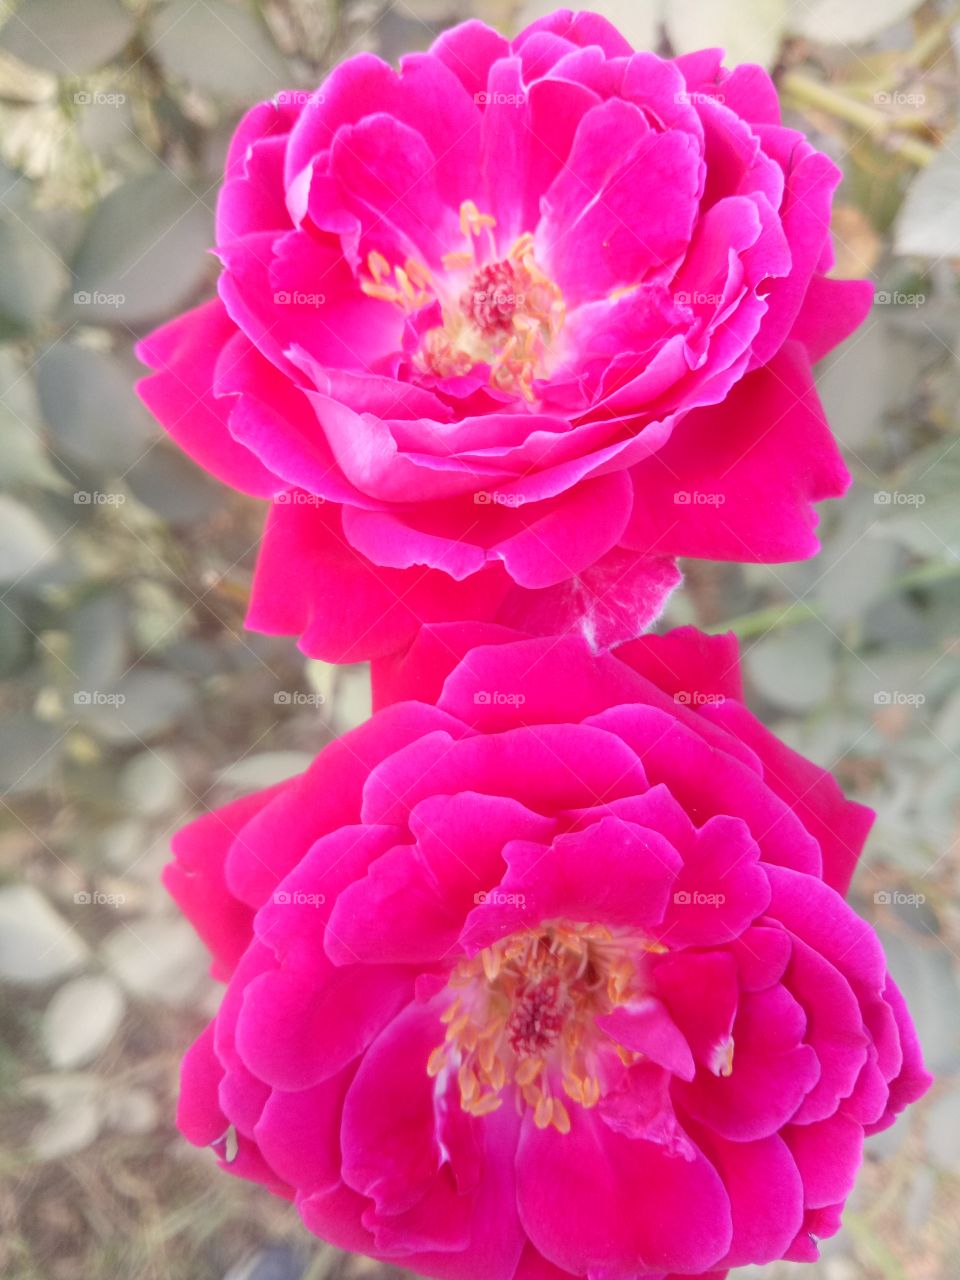 couple of rose